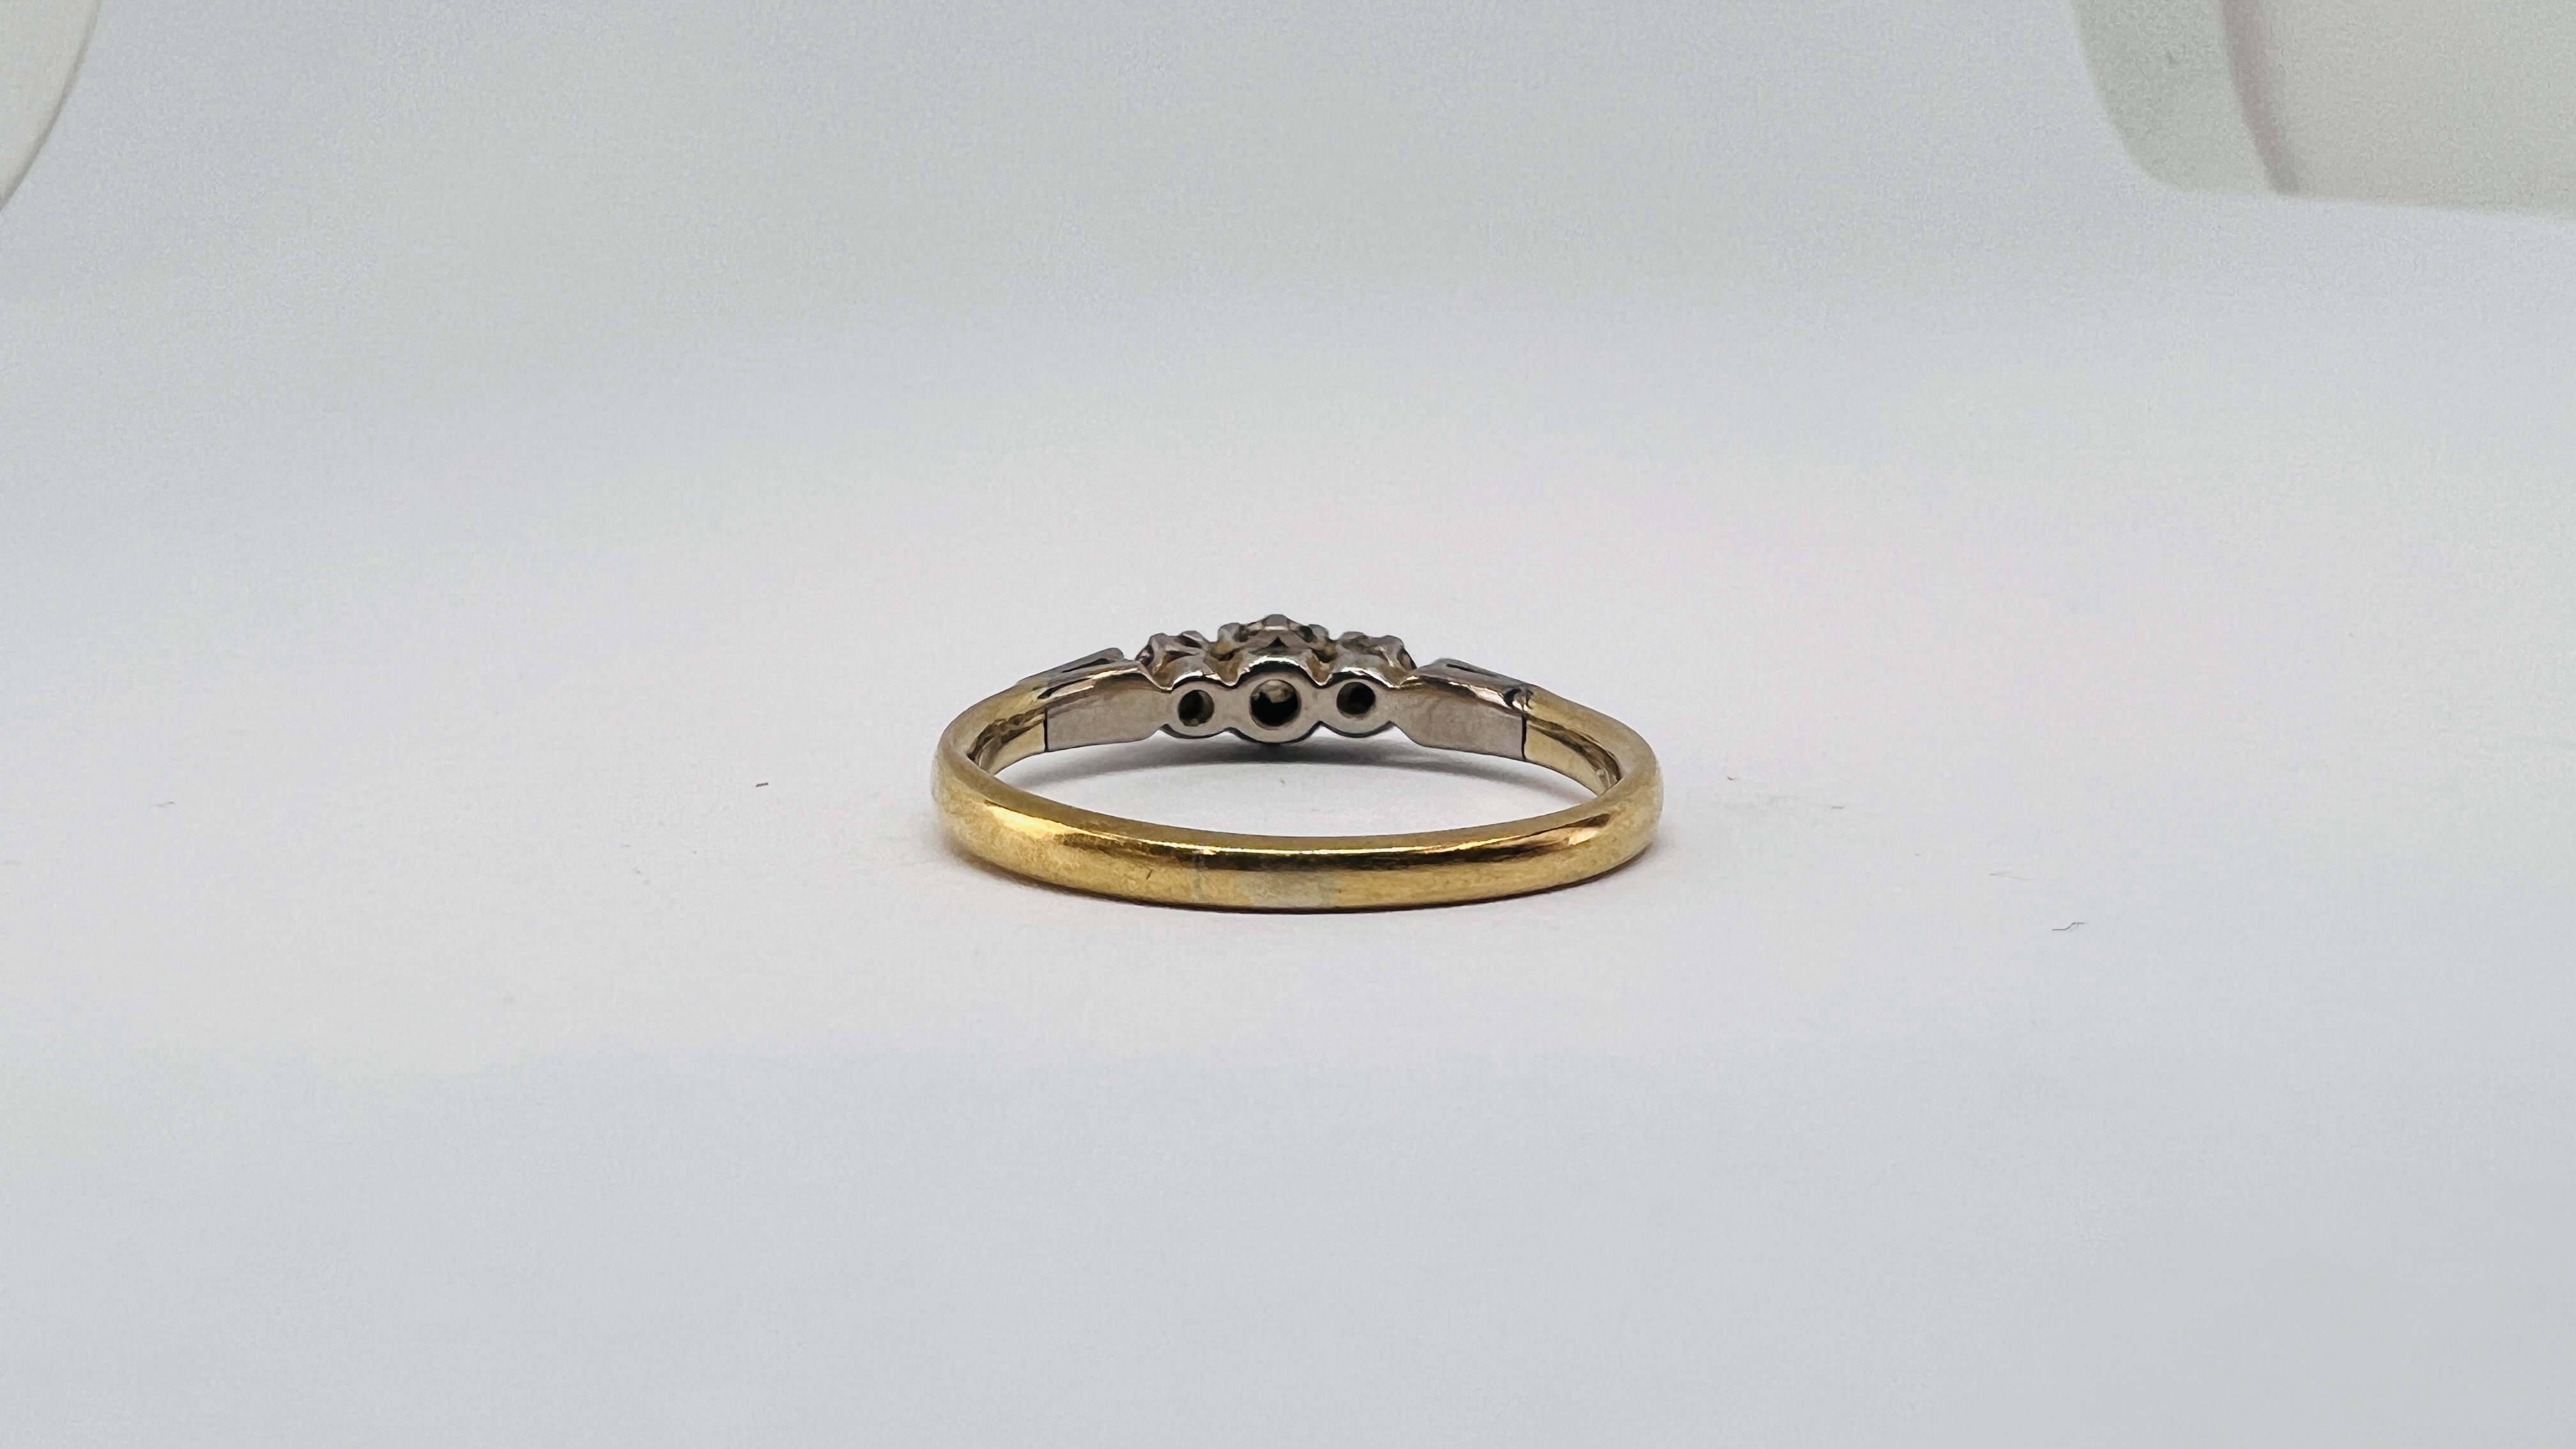 A YELLOW METAL 3 STONE DIAMOND RING (RUBBED MARKS). - Image 6 of 9